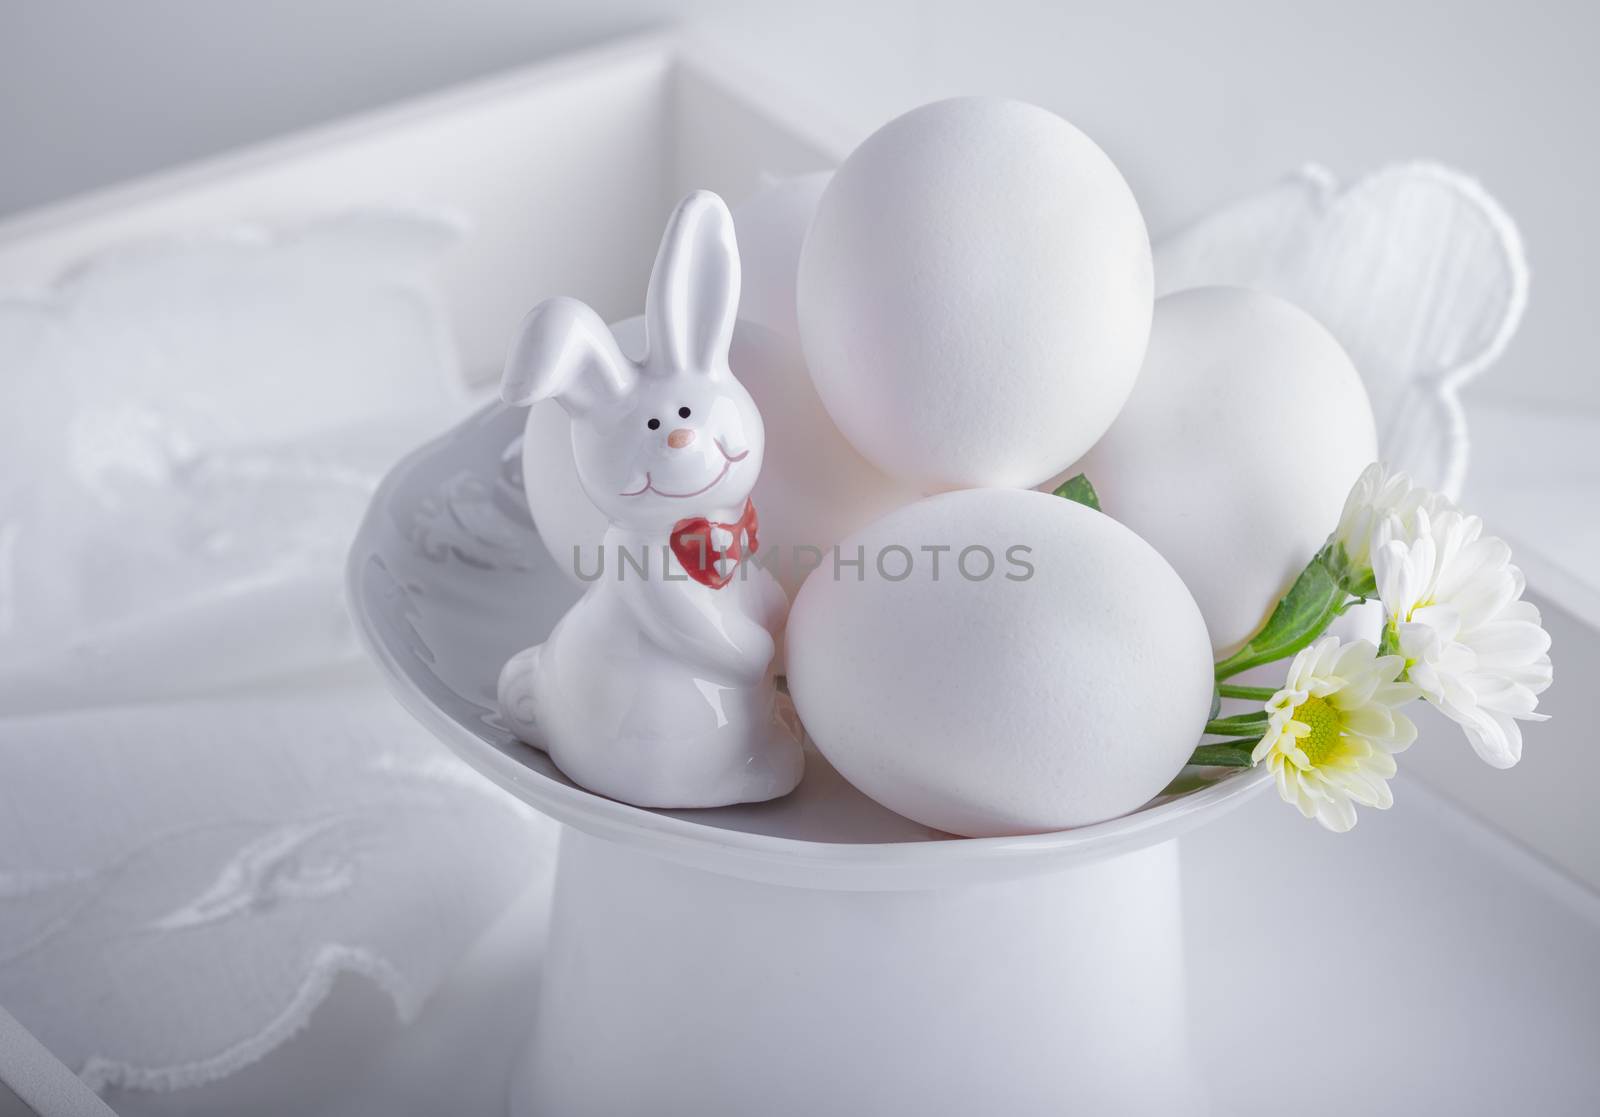 Eggs Rabbit and flowers on white surface. Easter symbols